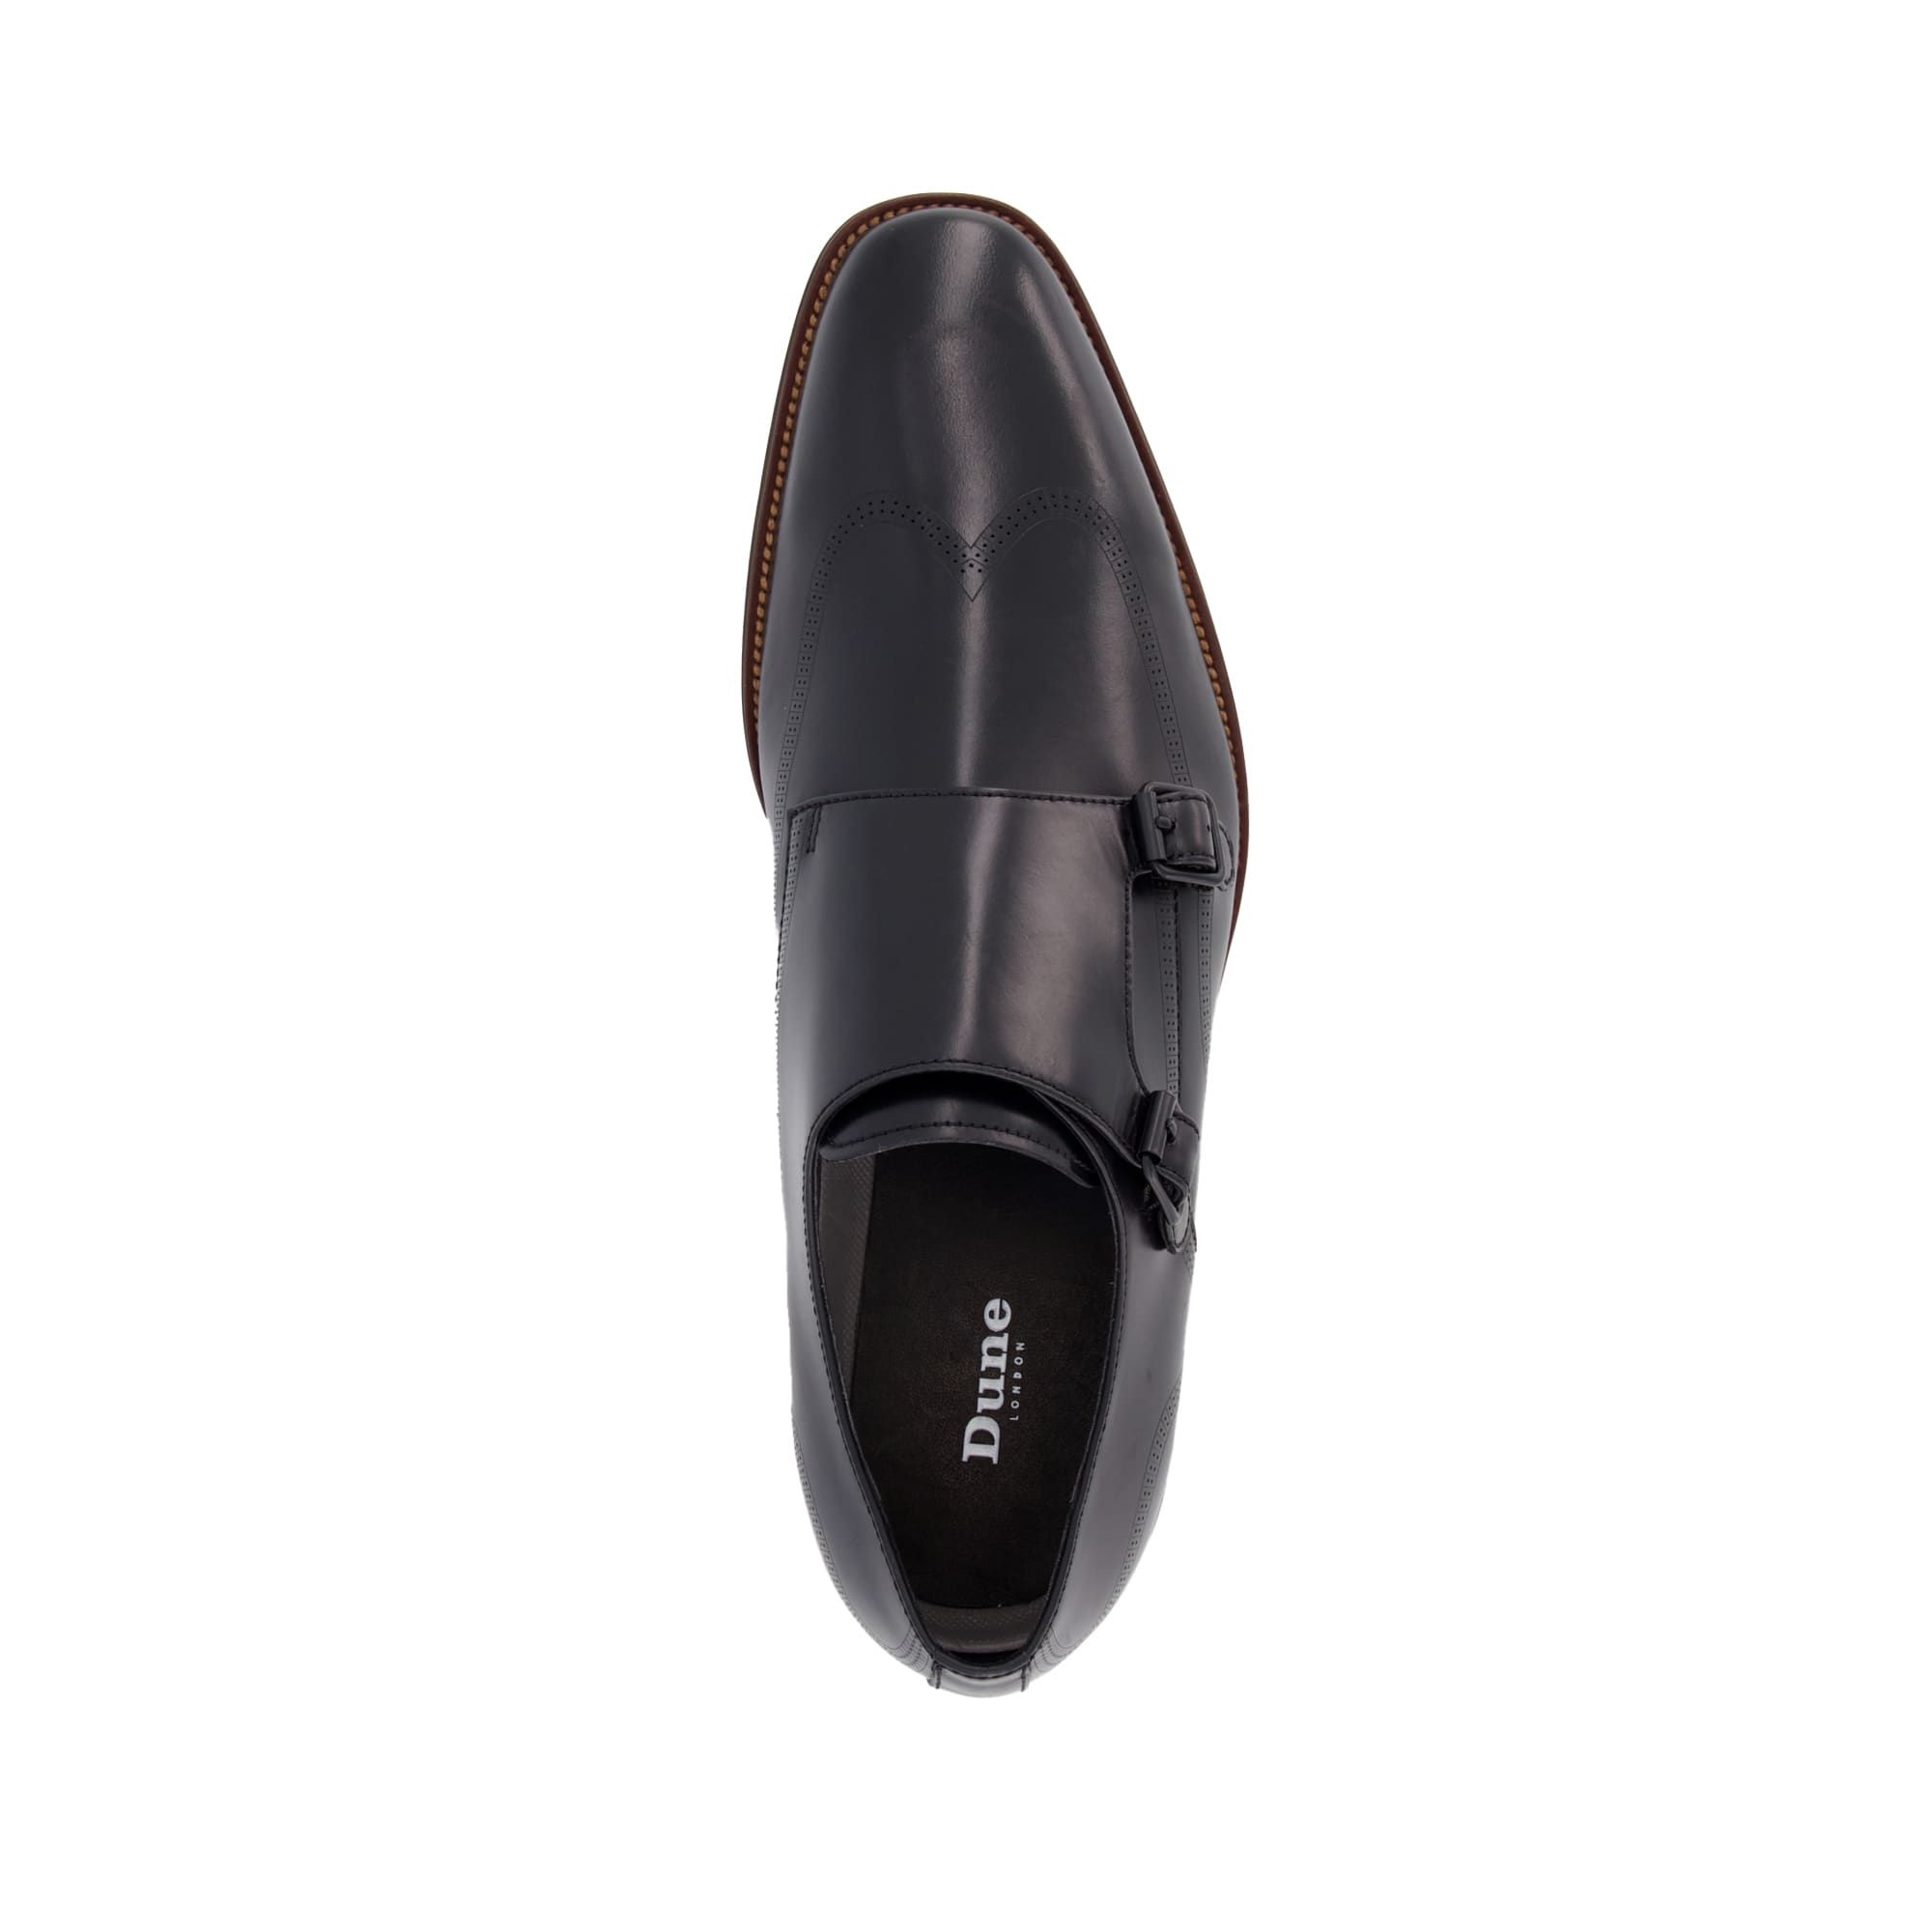 Give your formal looks an upgrade with our Shield shoes. This smooth leather pair is finished with buckles and tonal stitching.